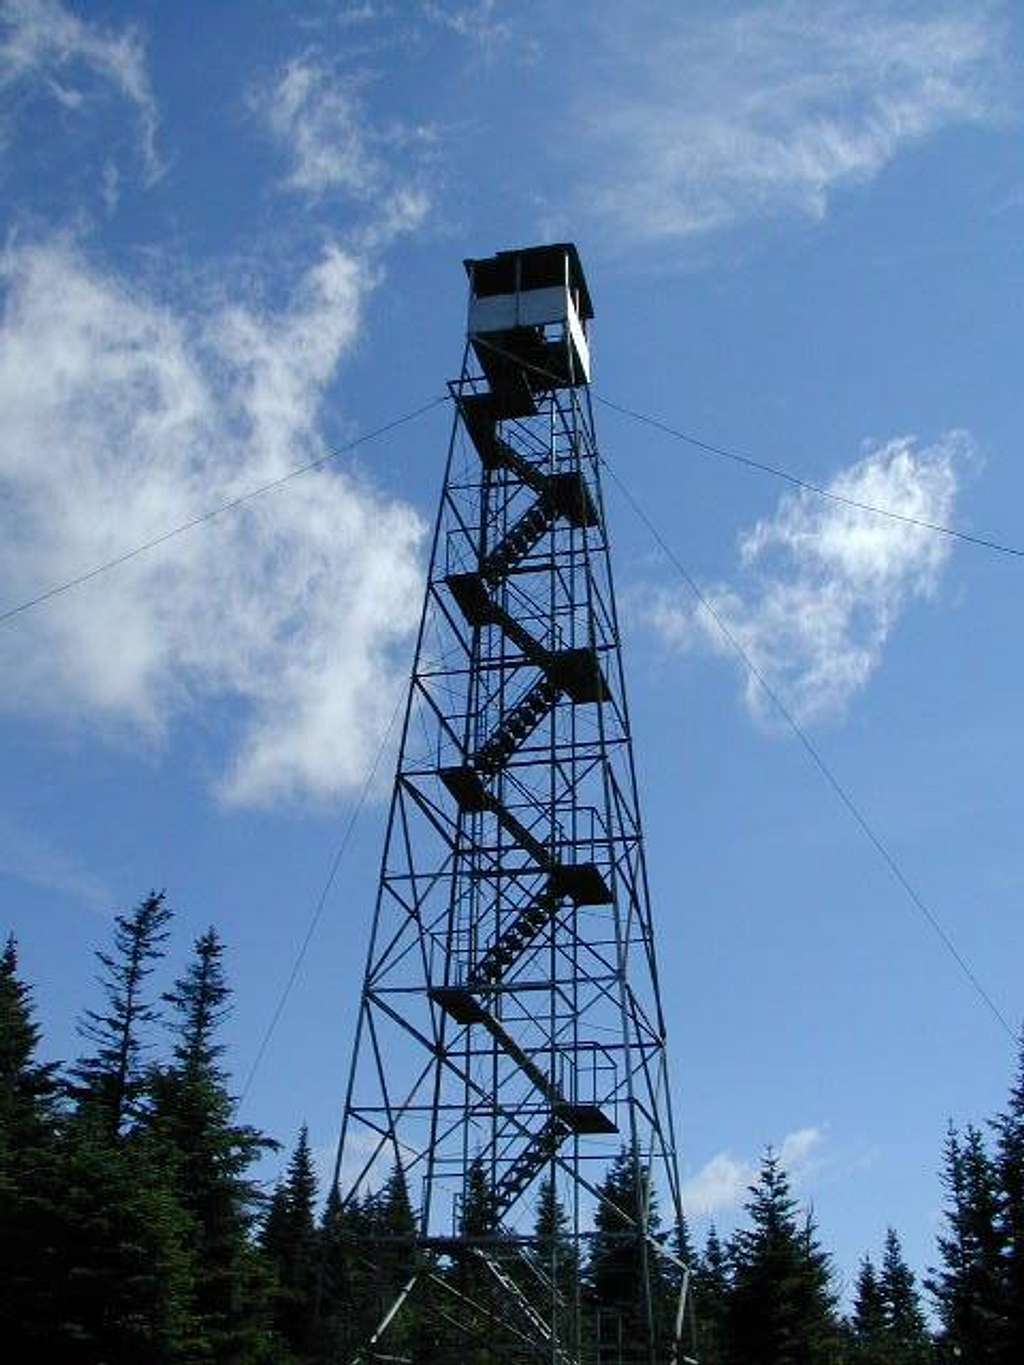 Wakely Mtn. Tower